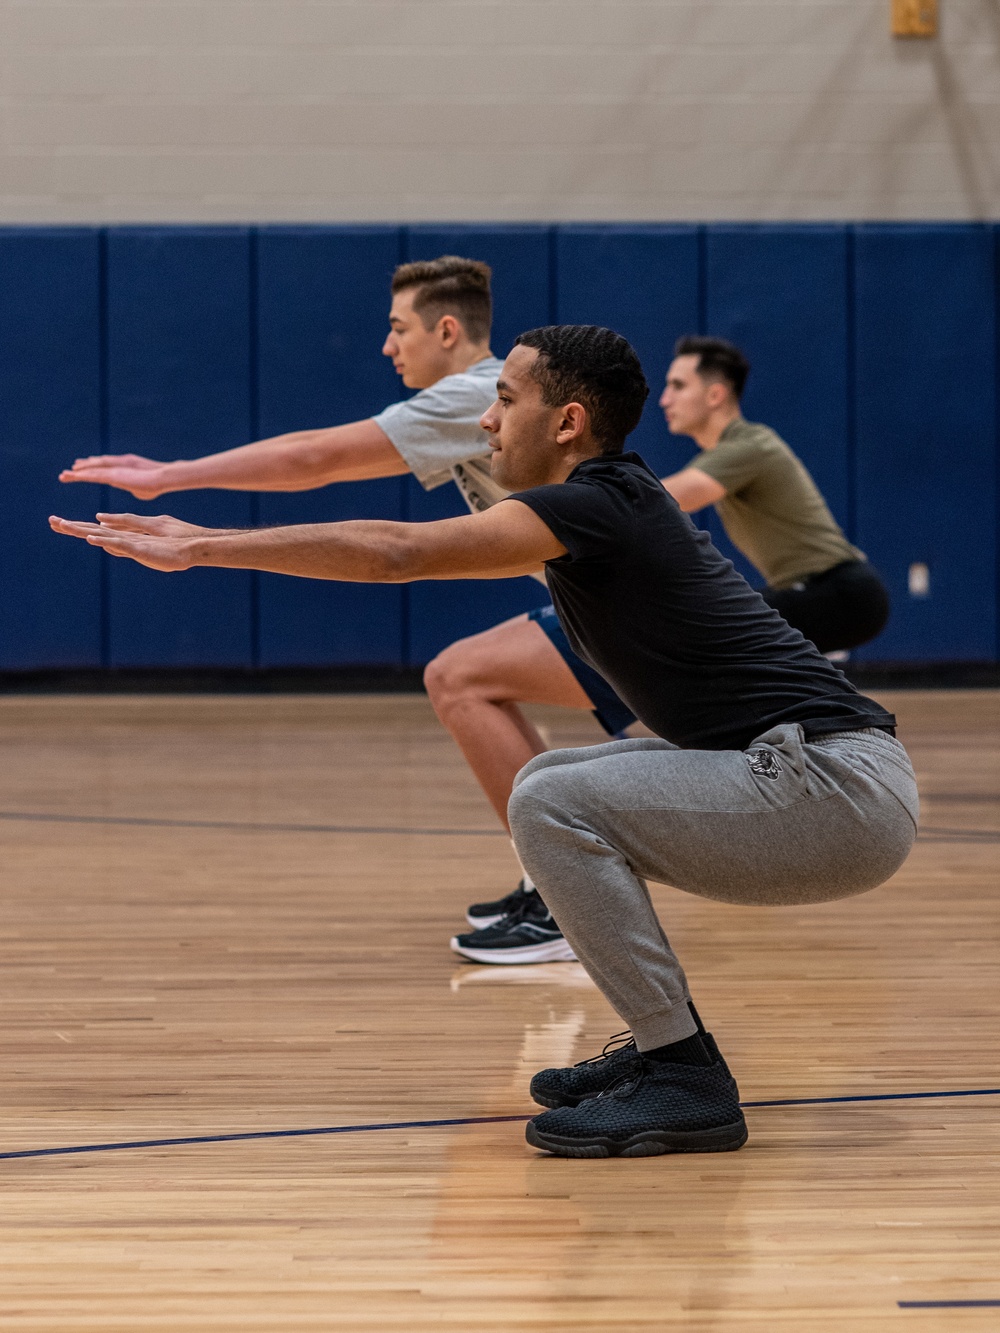 914th trainees prepare for fitness test